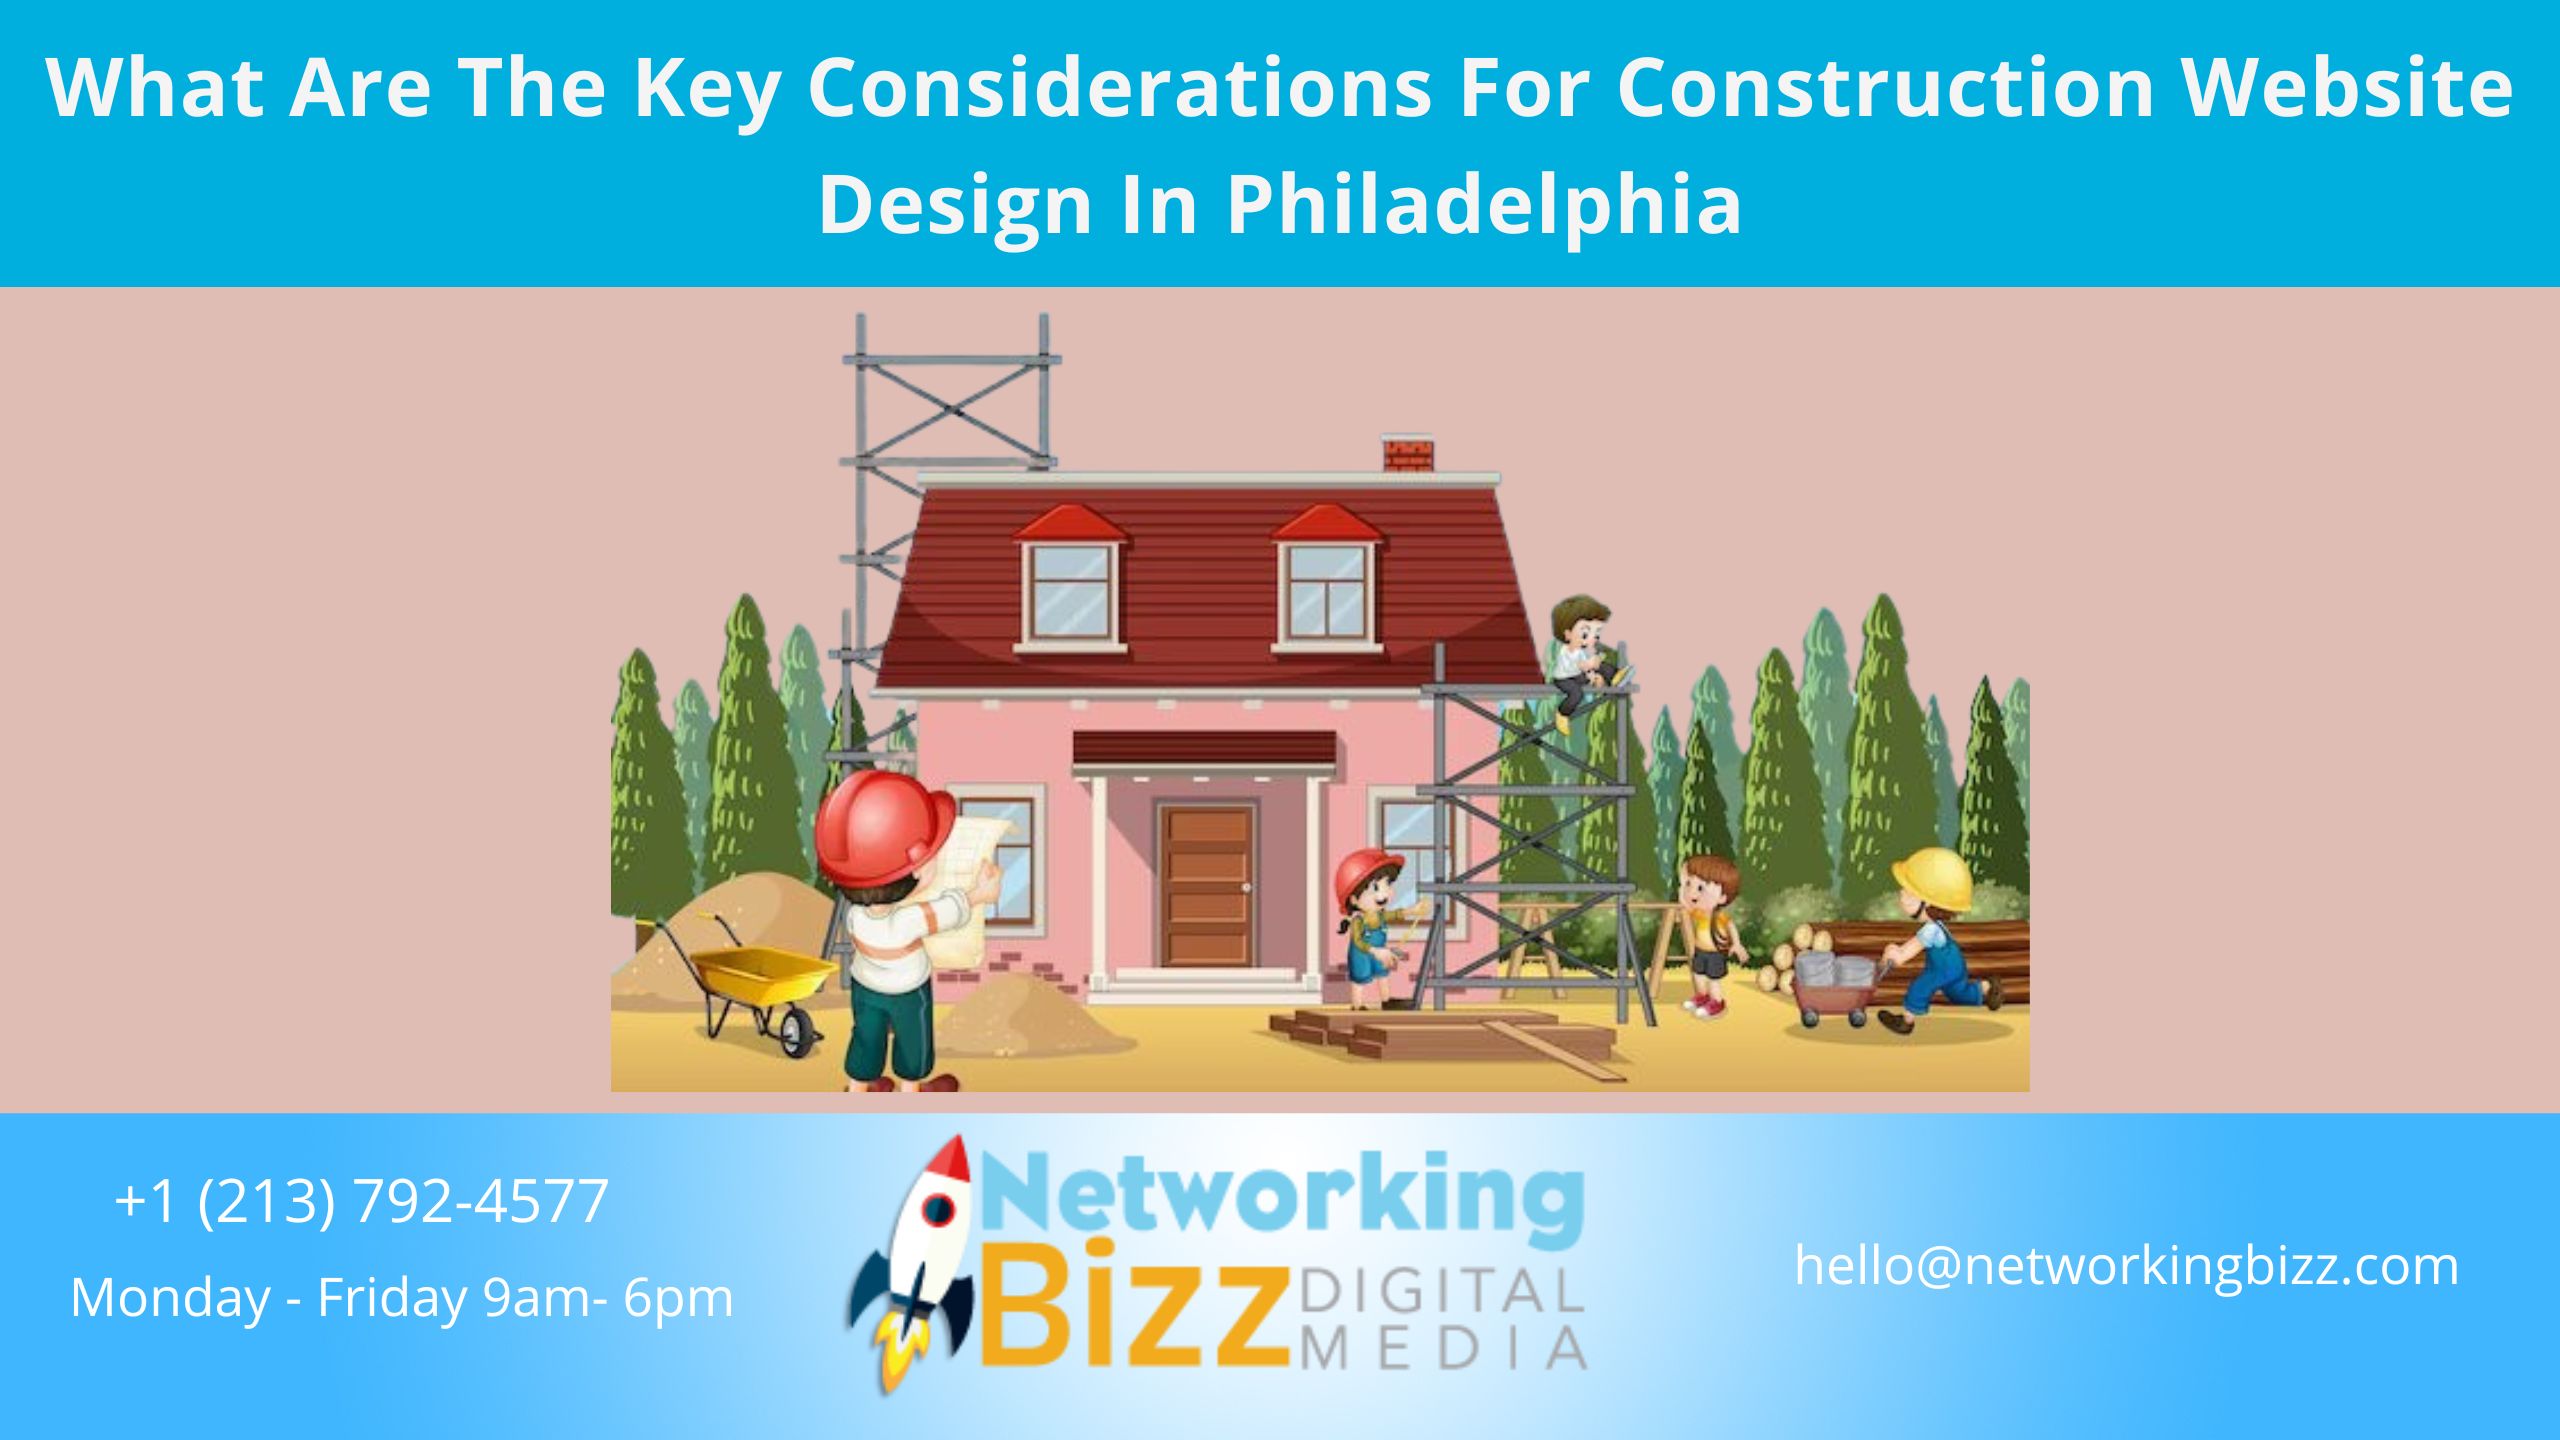 What Are The Key Considerations For Construction Website Design In Philadelphia